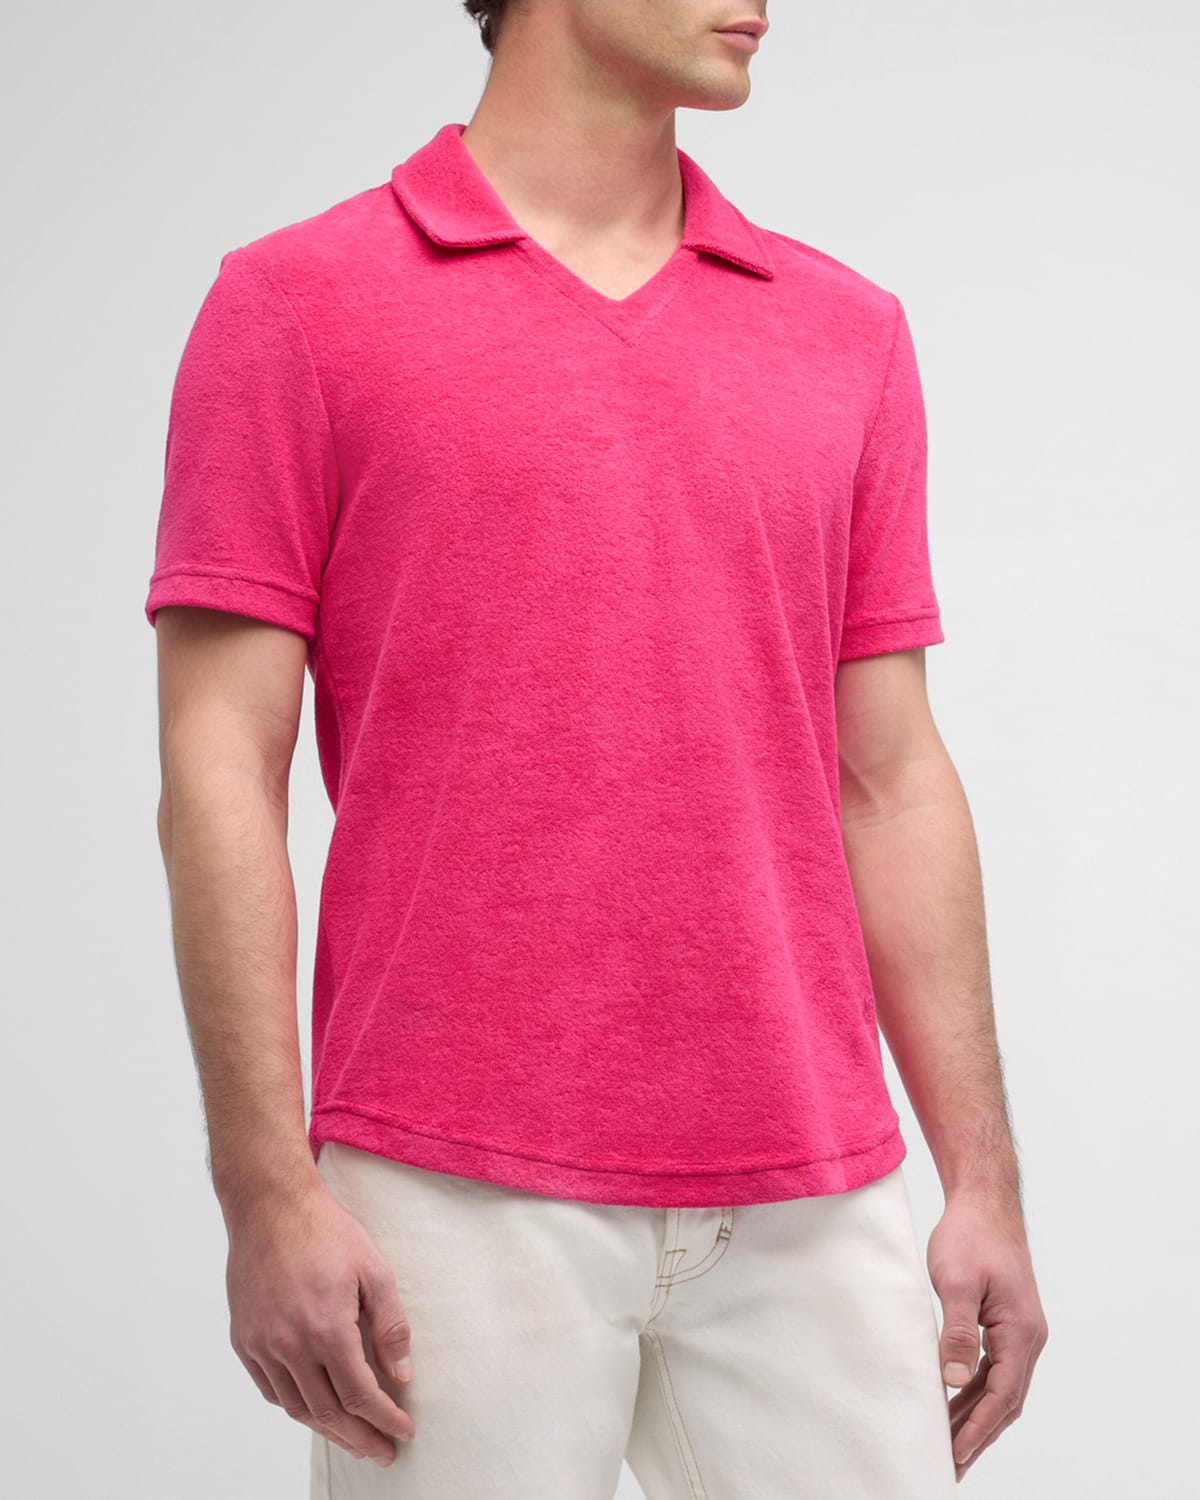 Men's Terry Toweling Polo Shirt